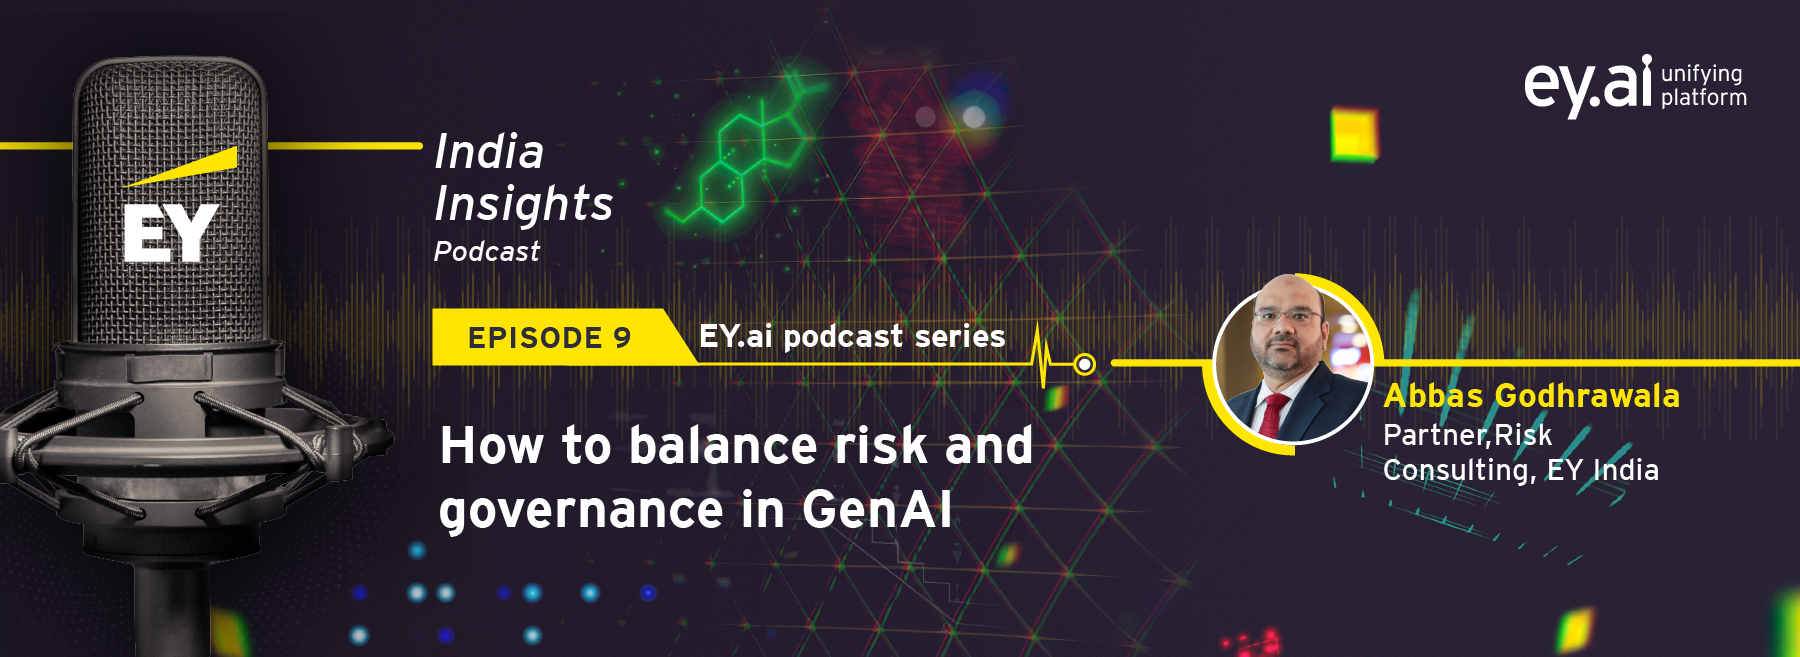 How to balance risk and governance in GenAI